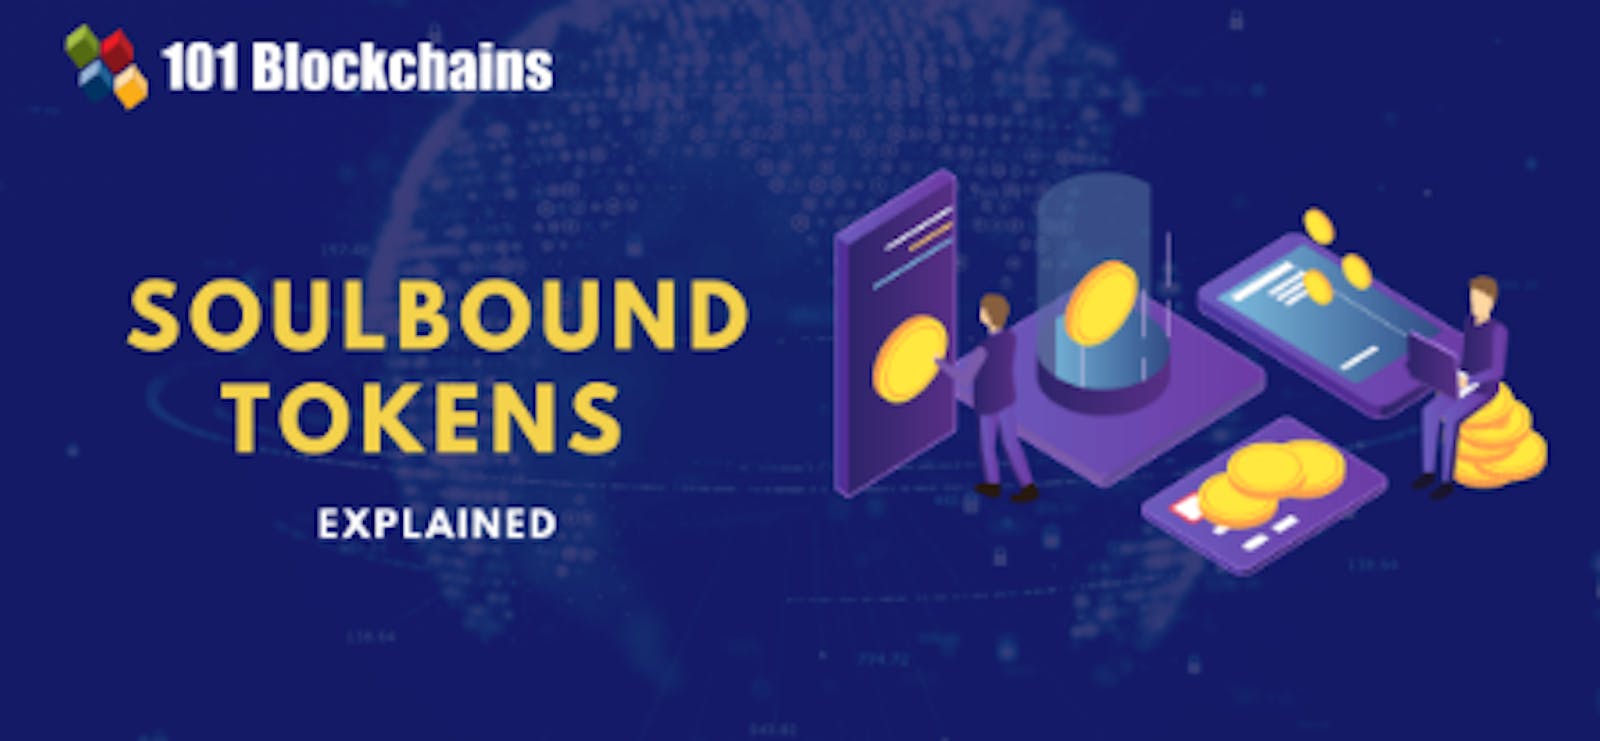 What are Soul bound tokens(SBT)?